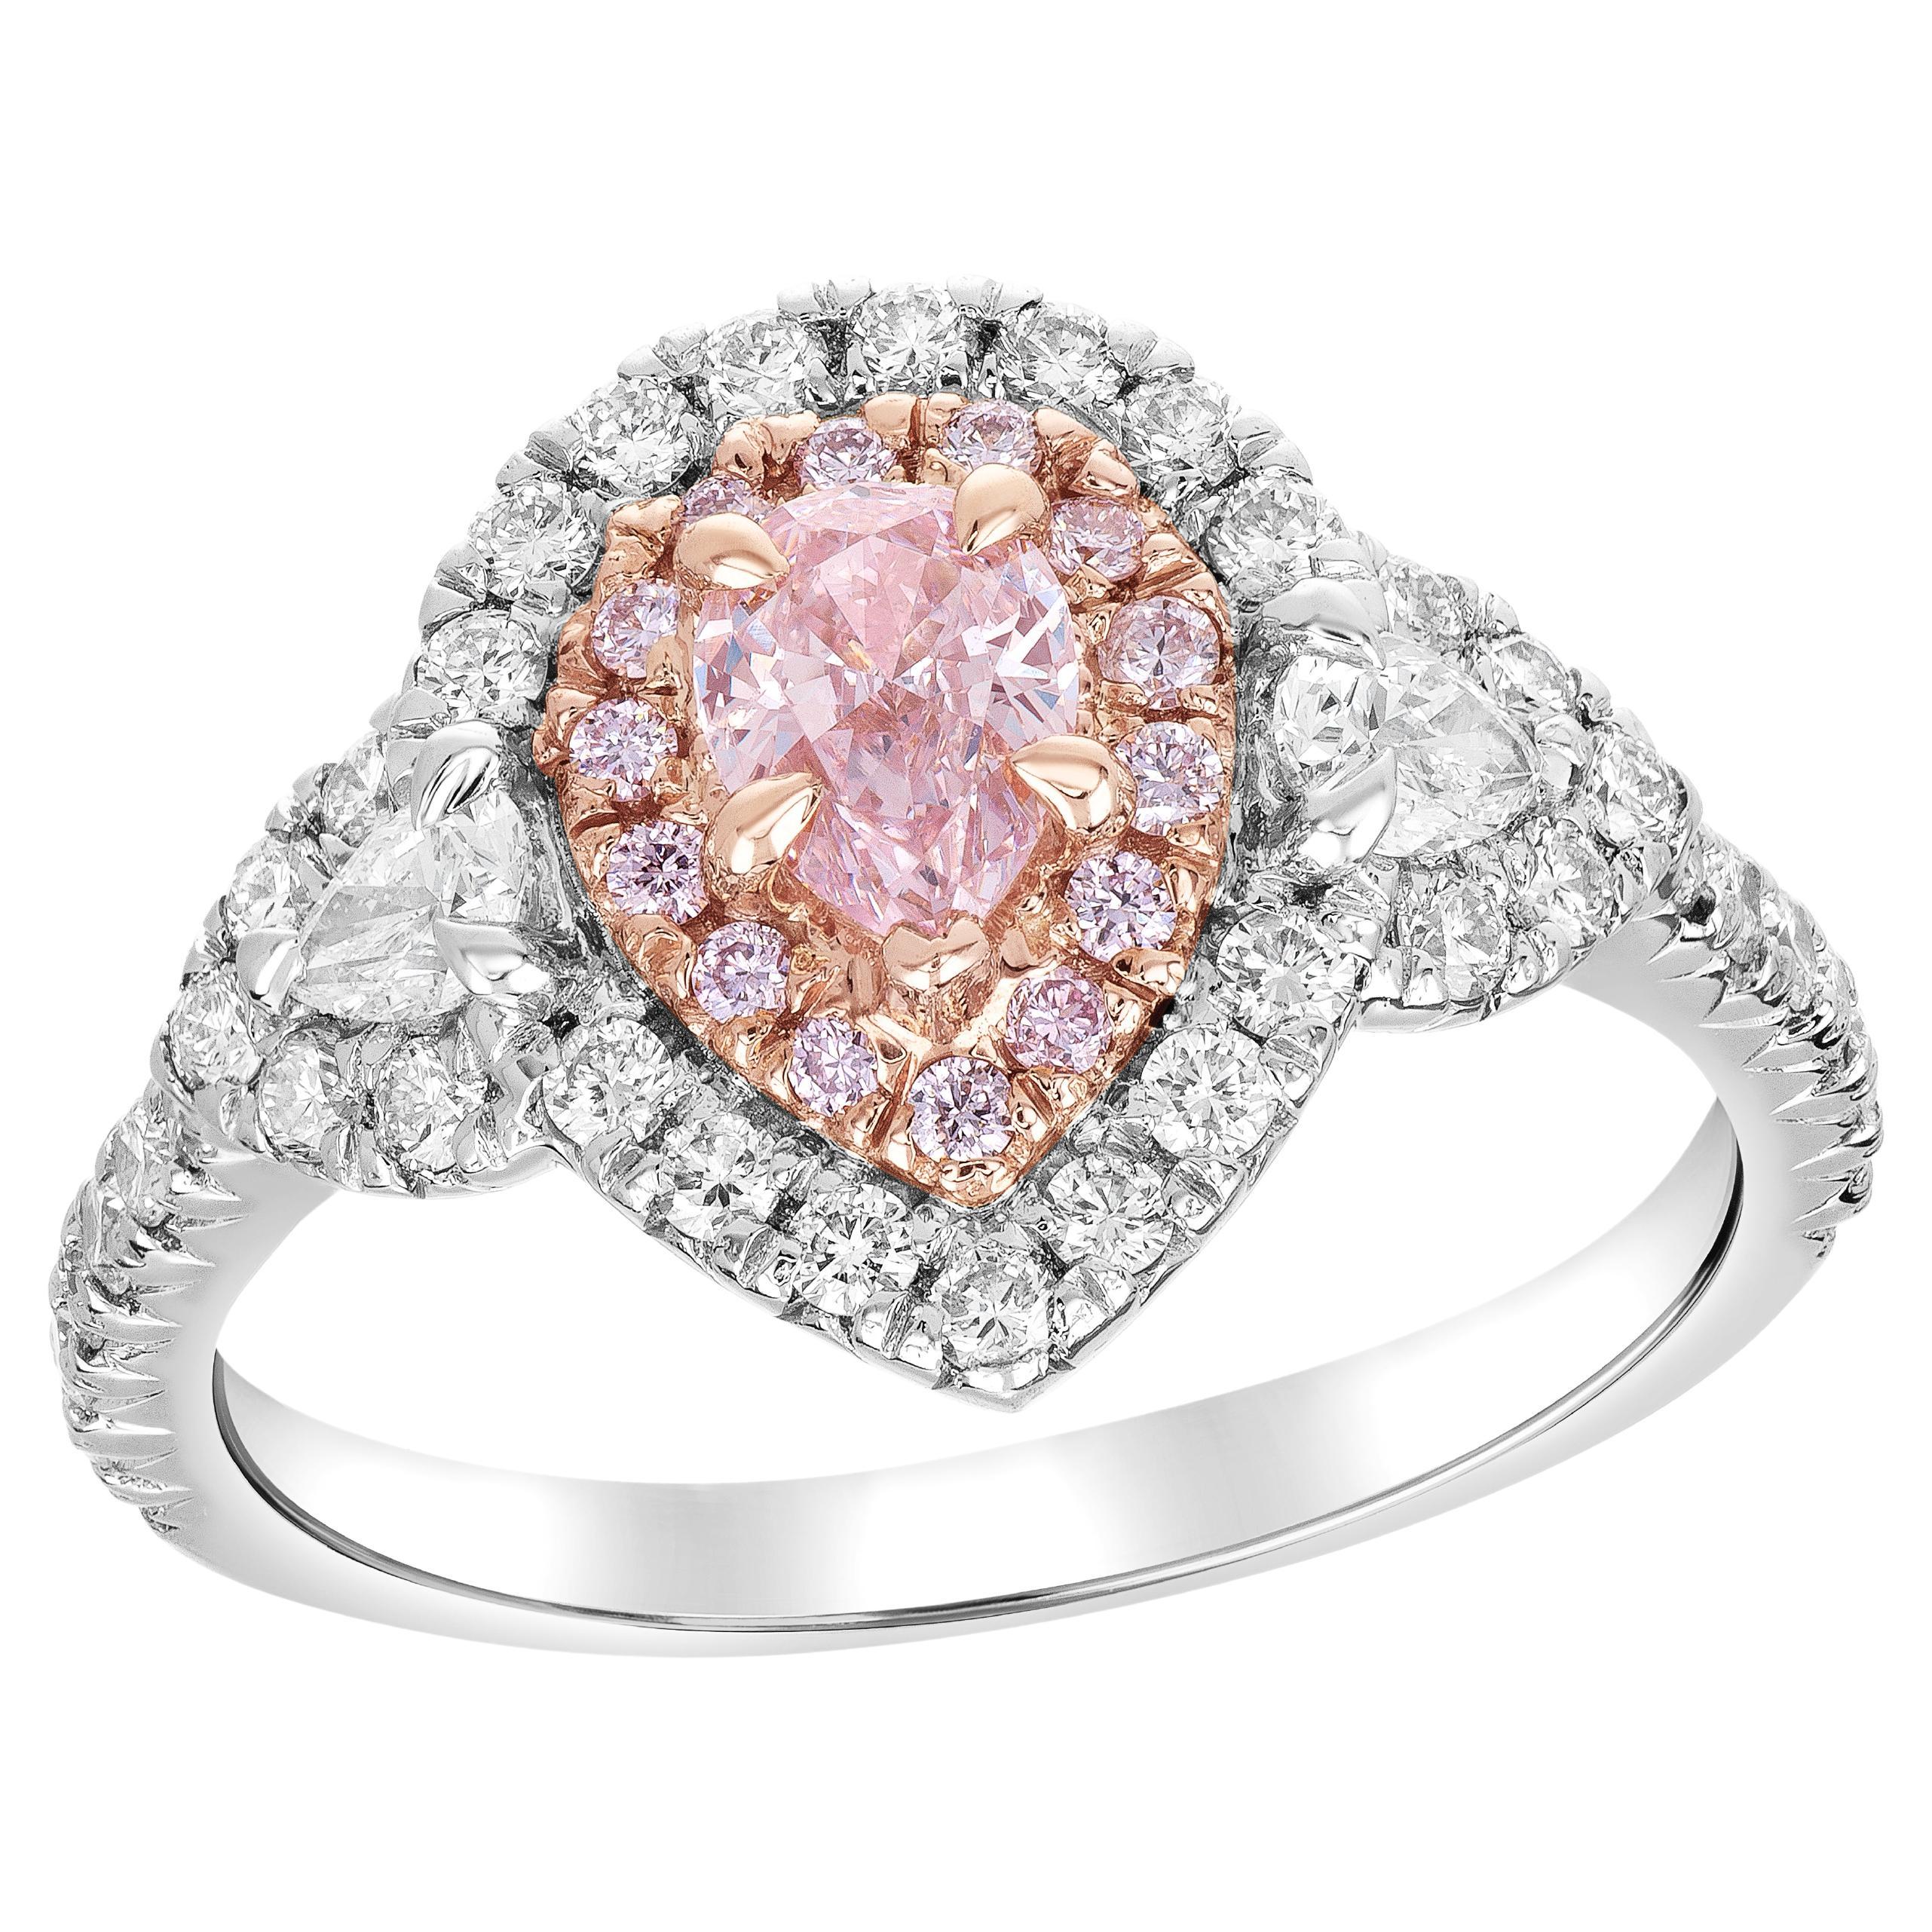 GIA Certified 0.43 Carat Fancy Pink Diamond Handmade Halo with Pear Shapes Ring For Sale